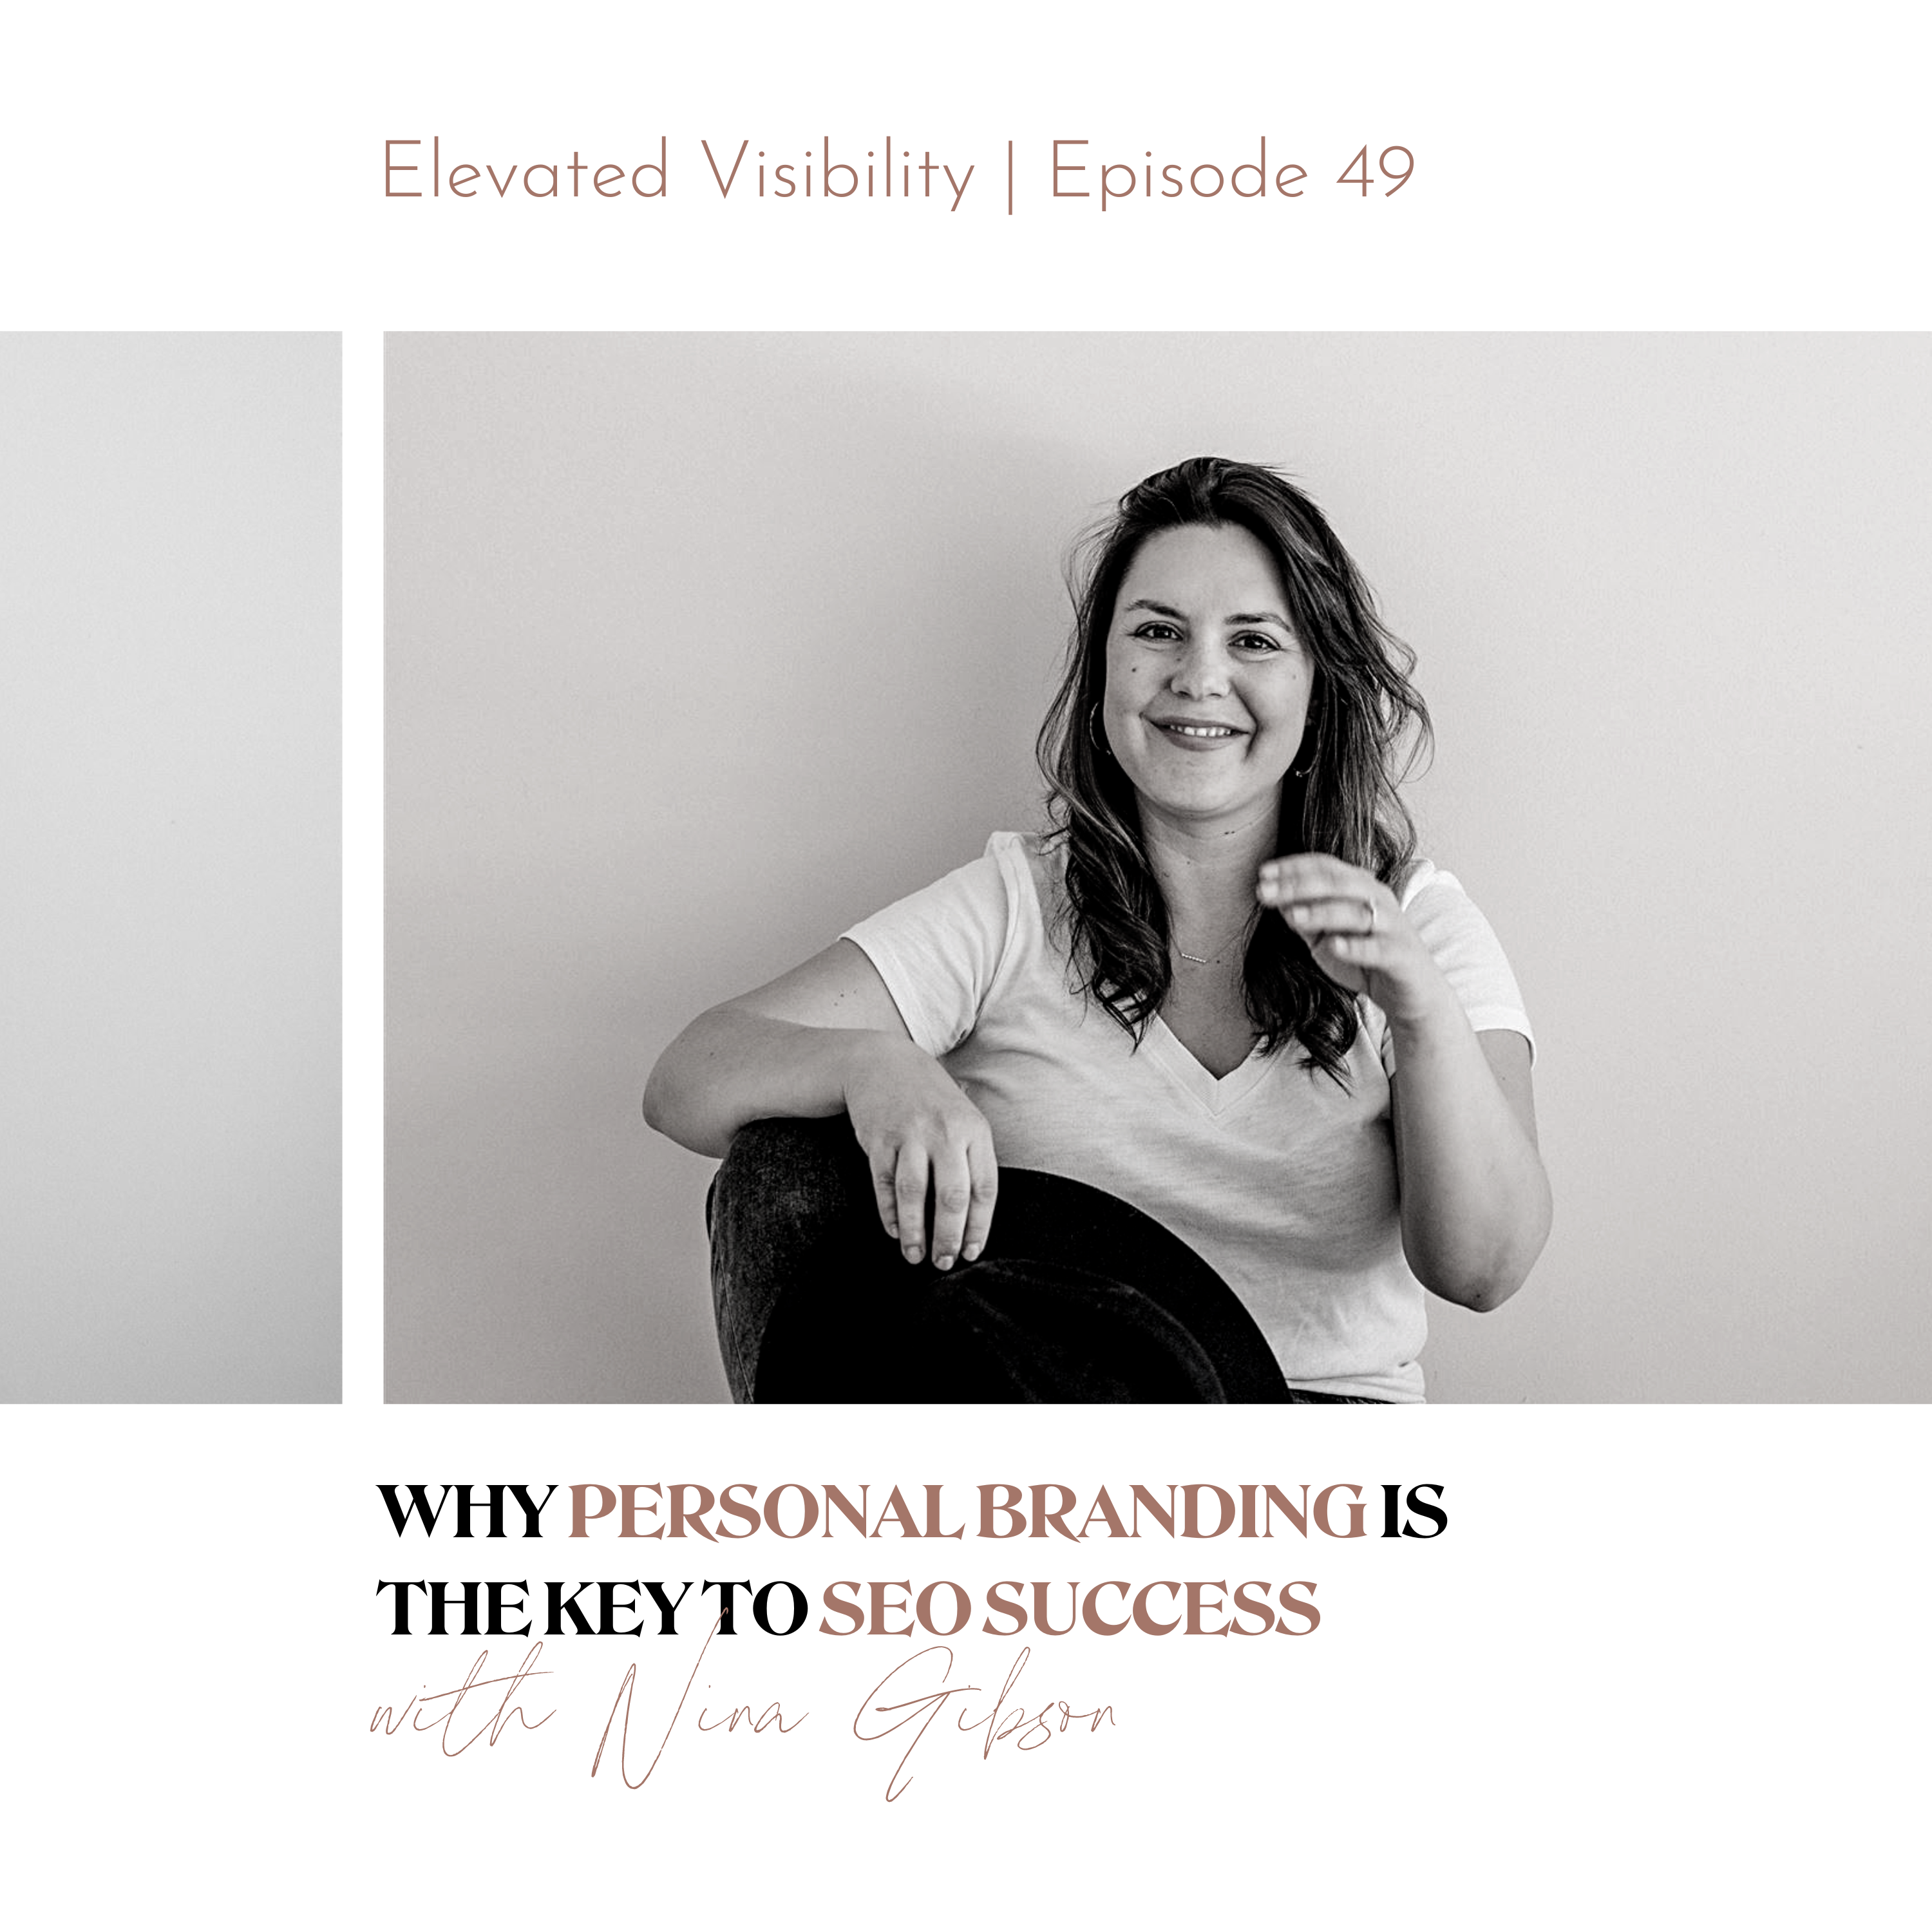 The Elevated Visibility Podcast episode 49: Why Personal Branding is the Key to SEO Success - featured image